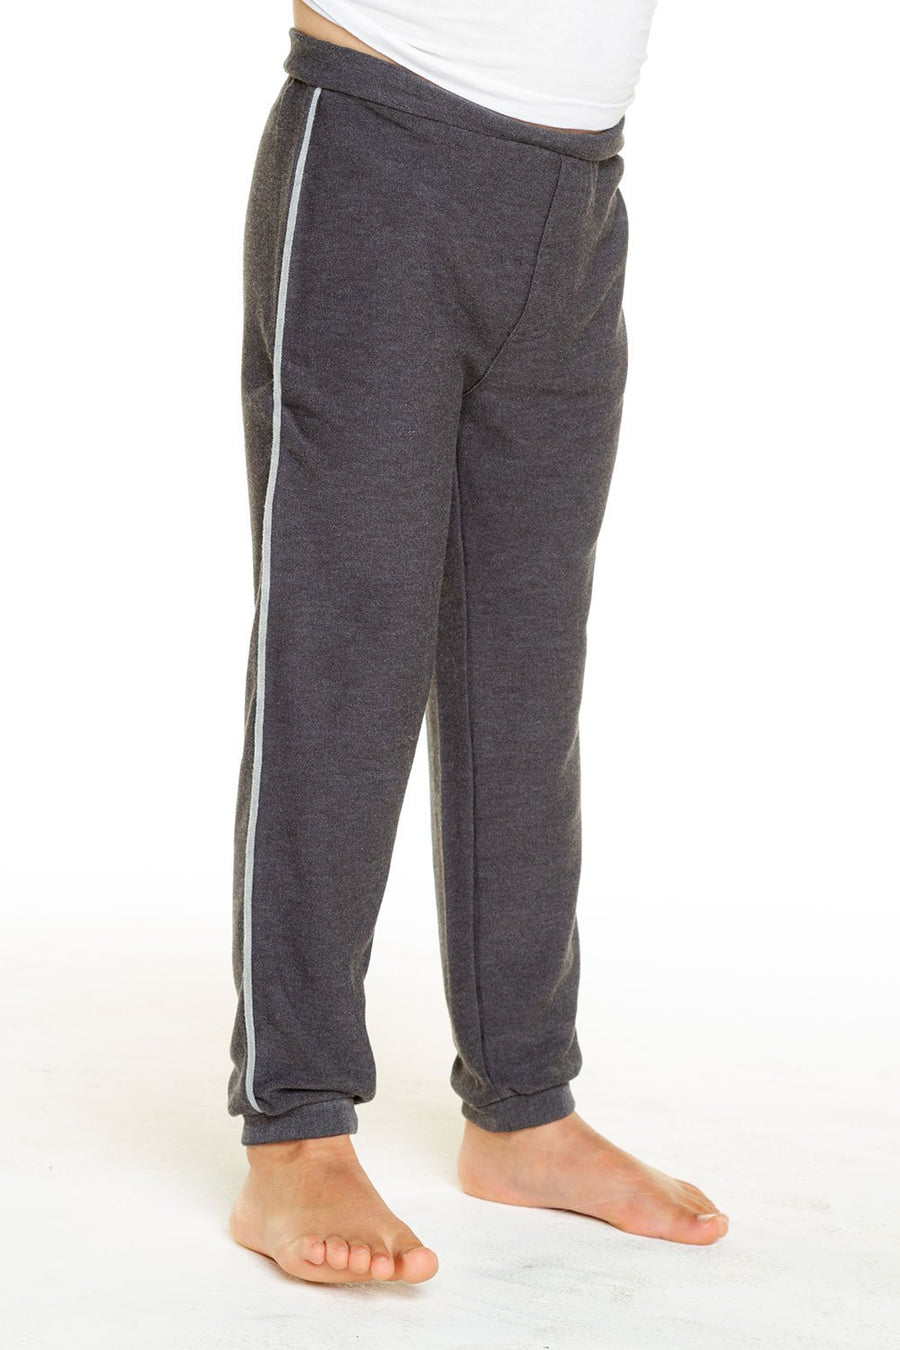 Cozy Knit Lounge Pant Chaser